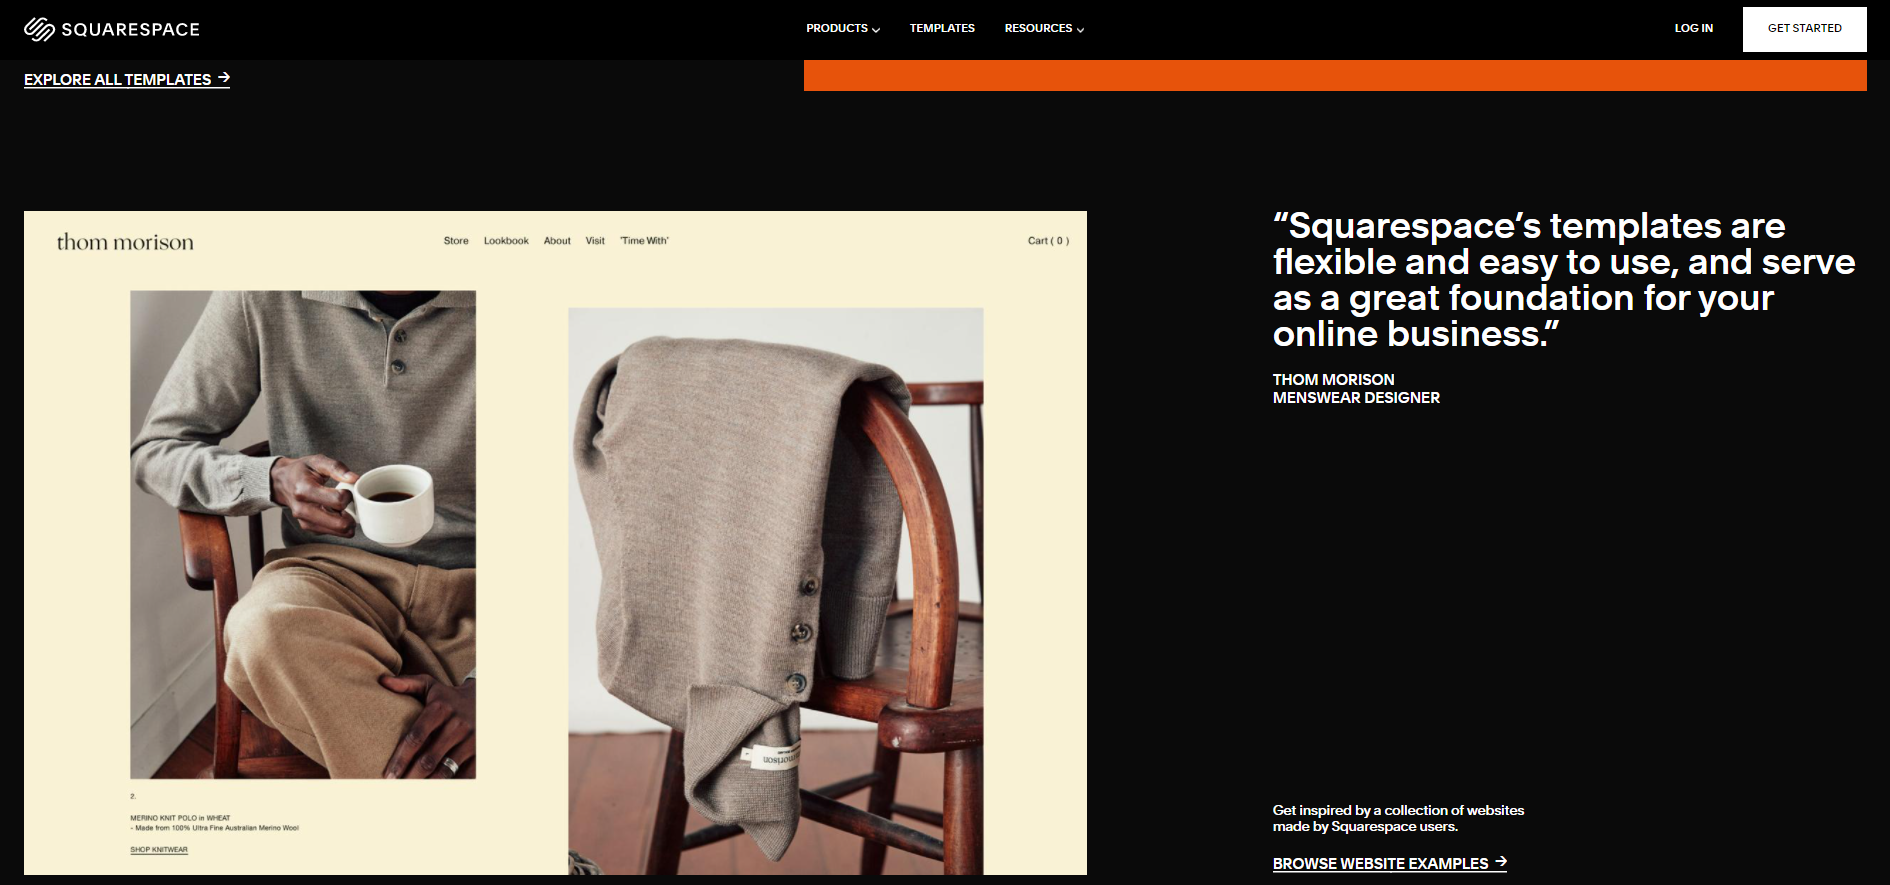 The testimonial on the home page of Squarespace is placed between two call to action buttons